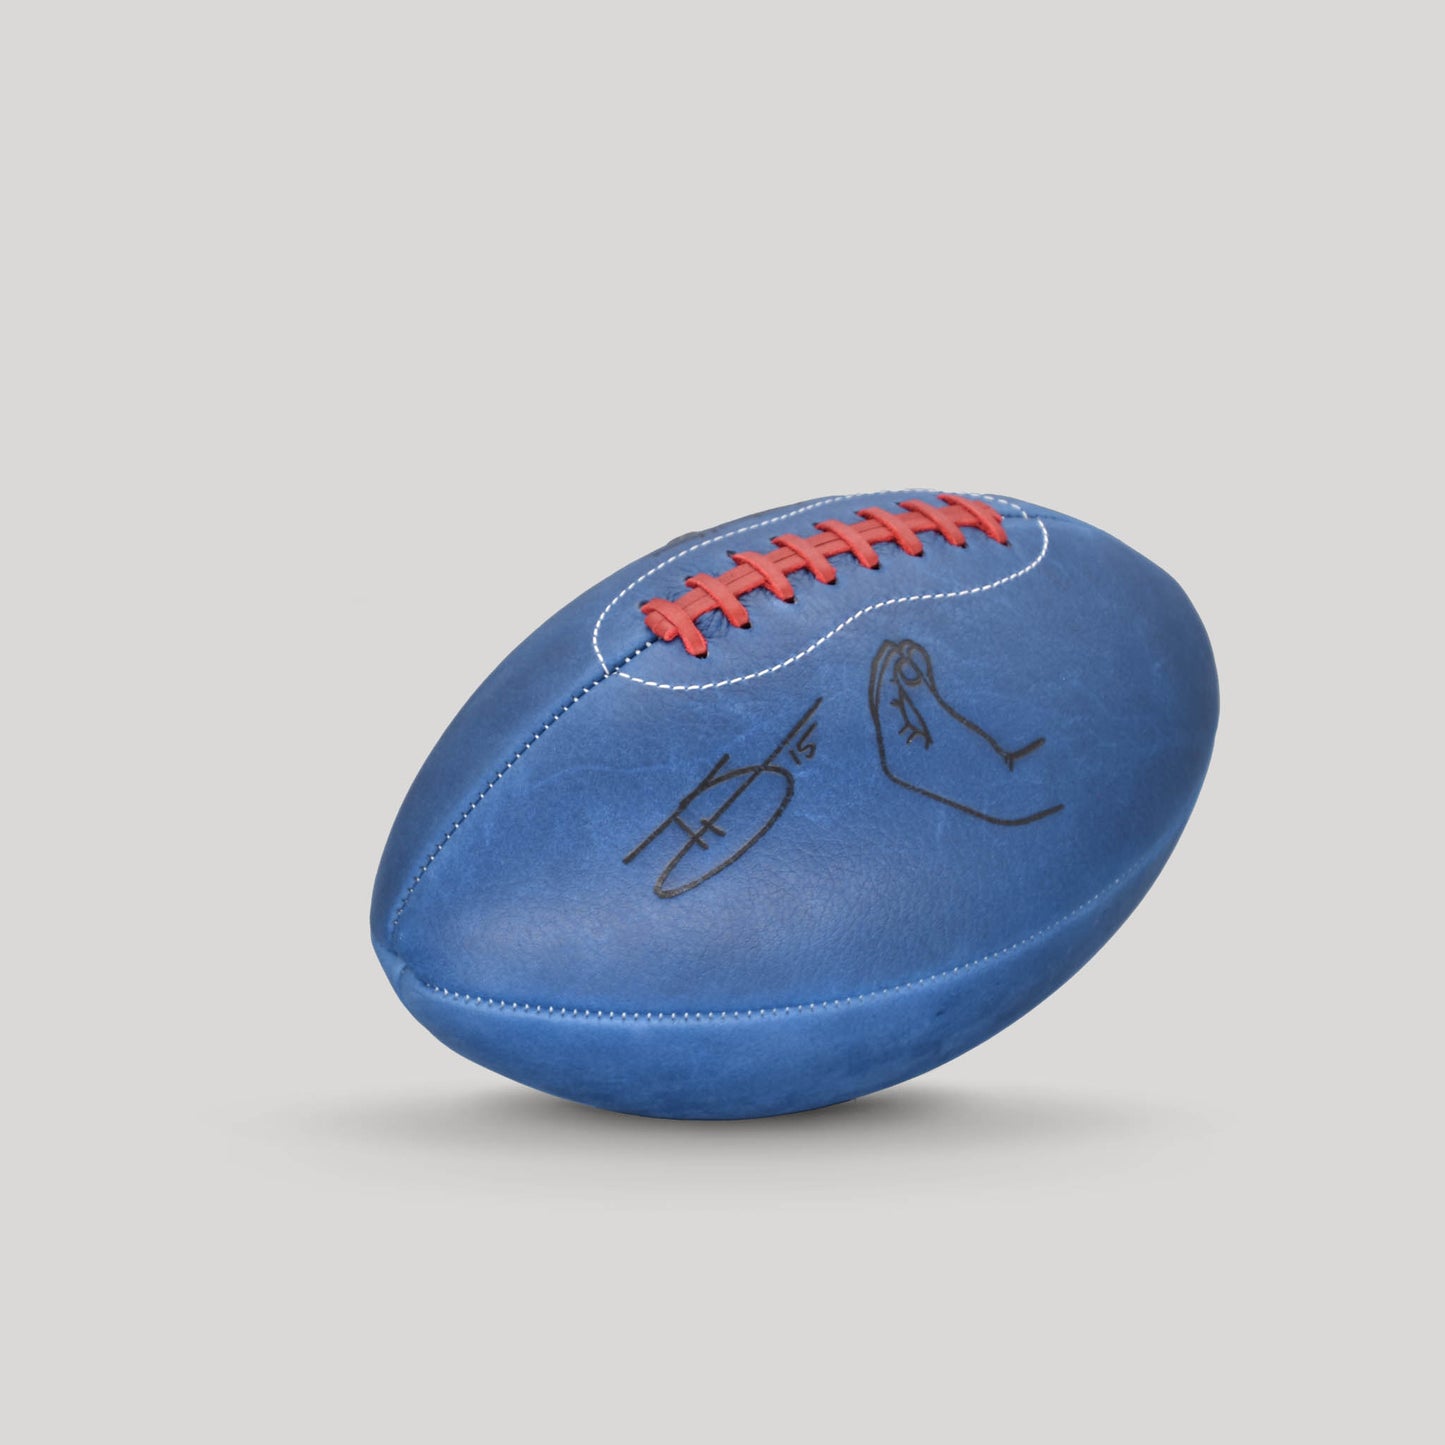 
                  
                    TD 15 Limited Edition Football in Partnership with Tommy DeVito
                  
                